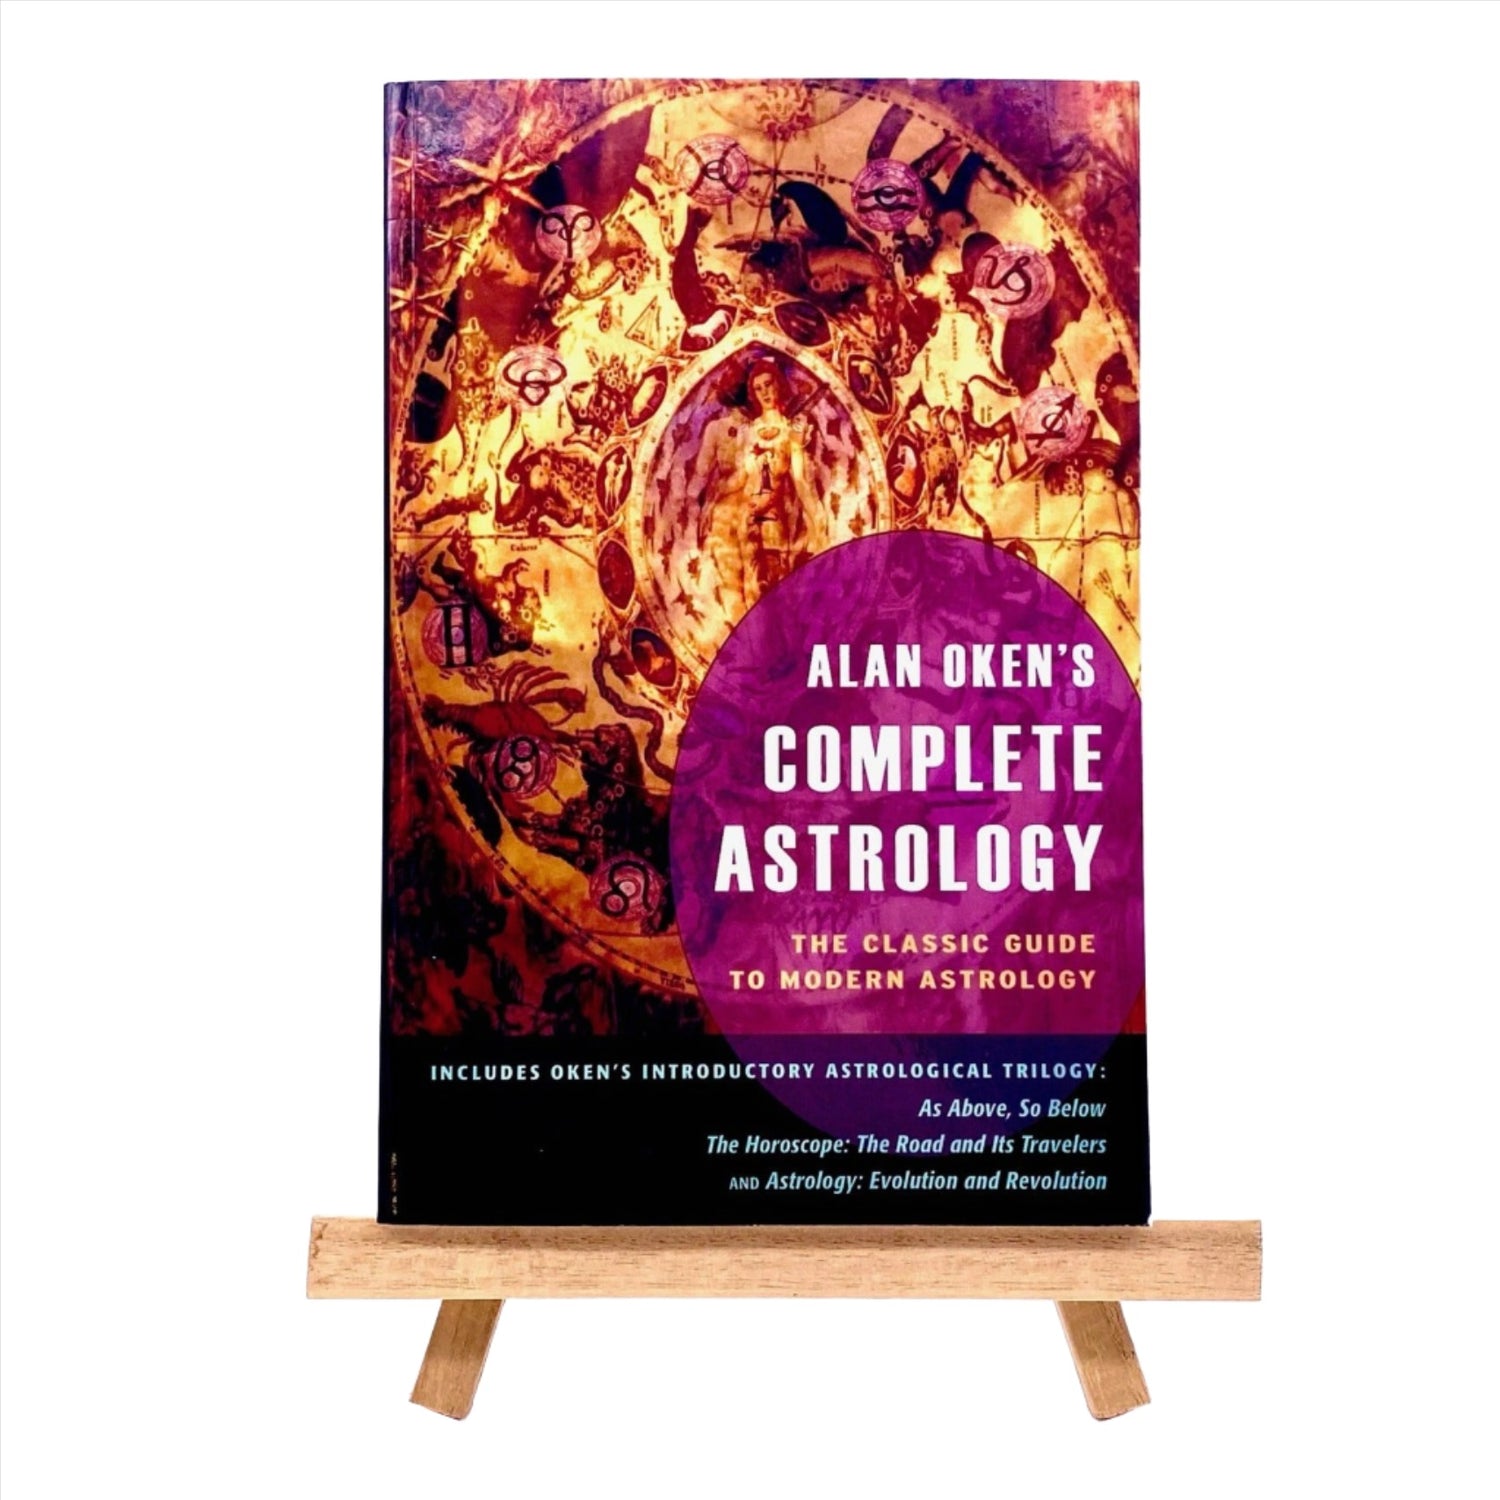 Cover of Alan Oken's Complete Astrology book.